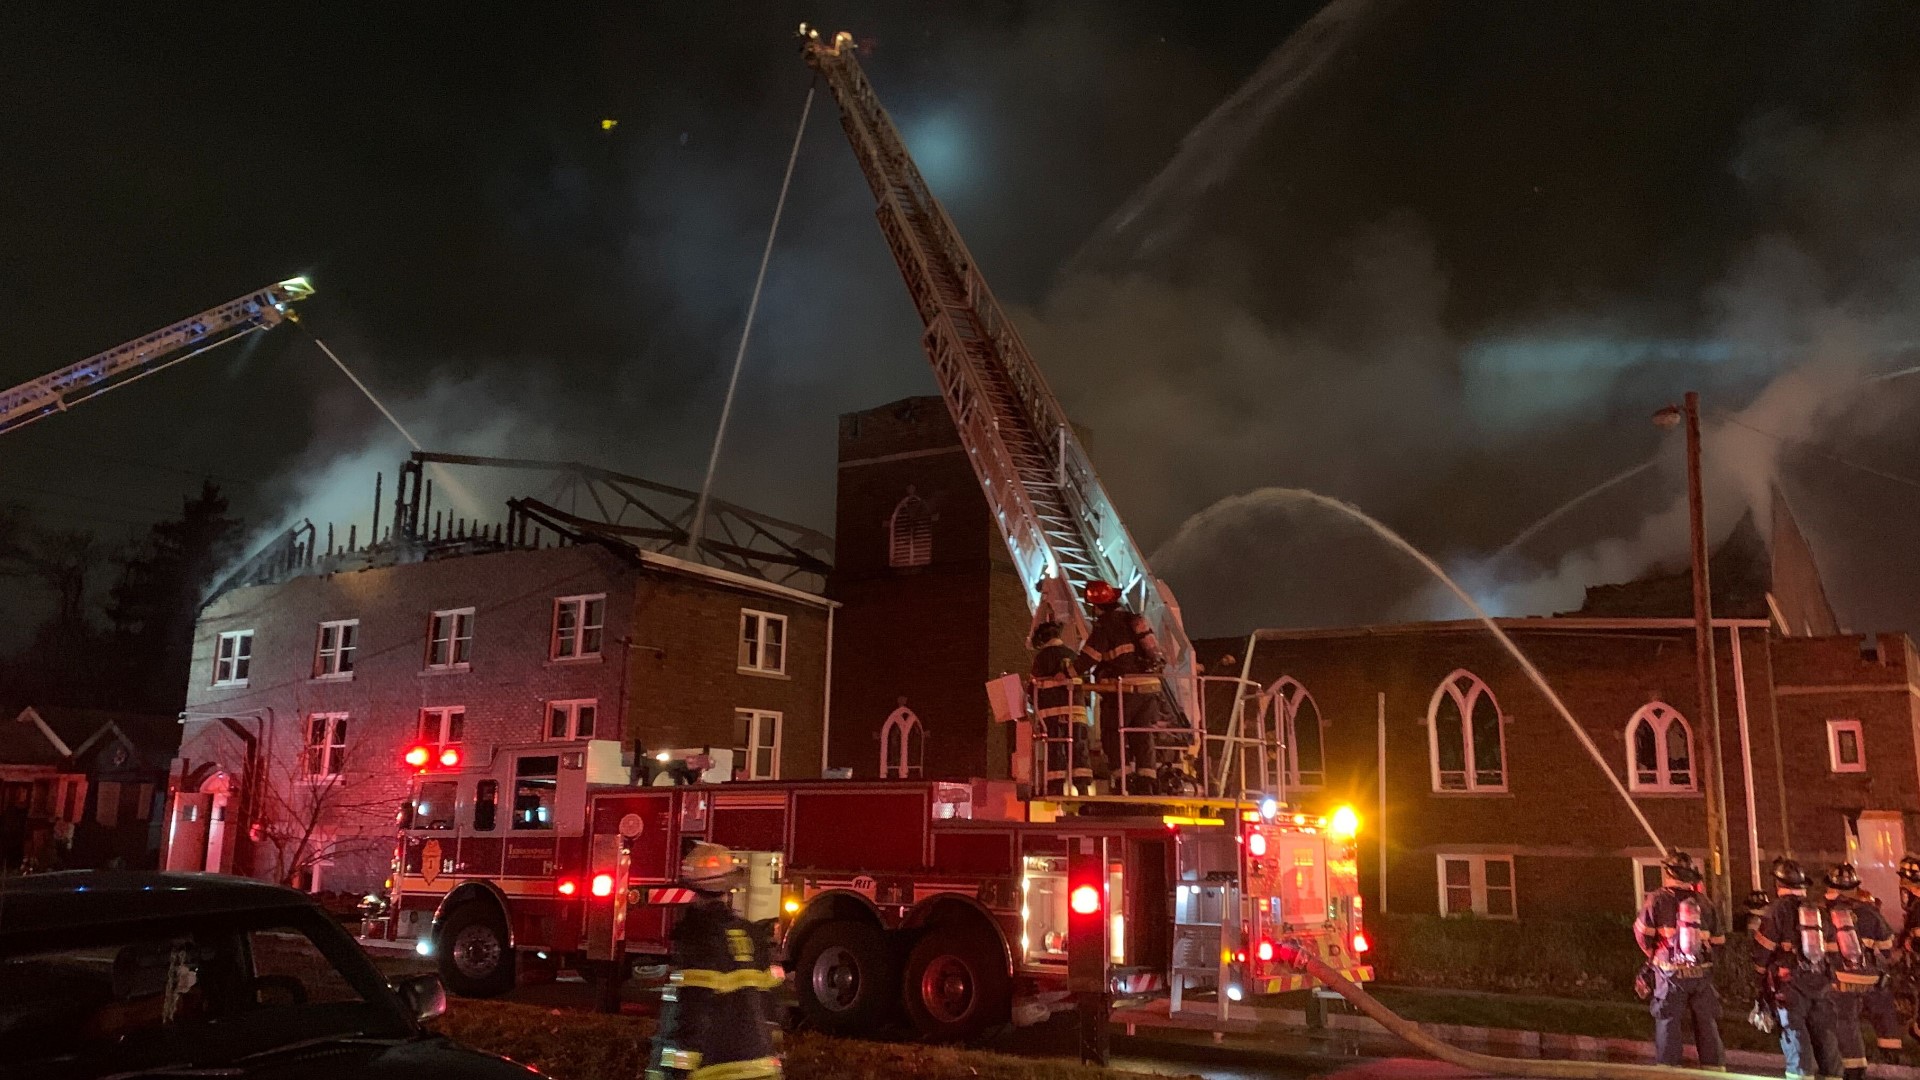 ATF investigators have been called in after an Indianapolis church burned overnight.